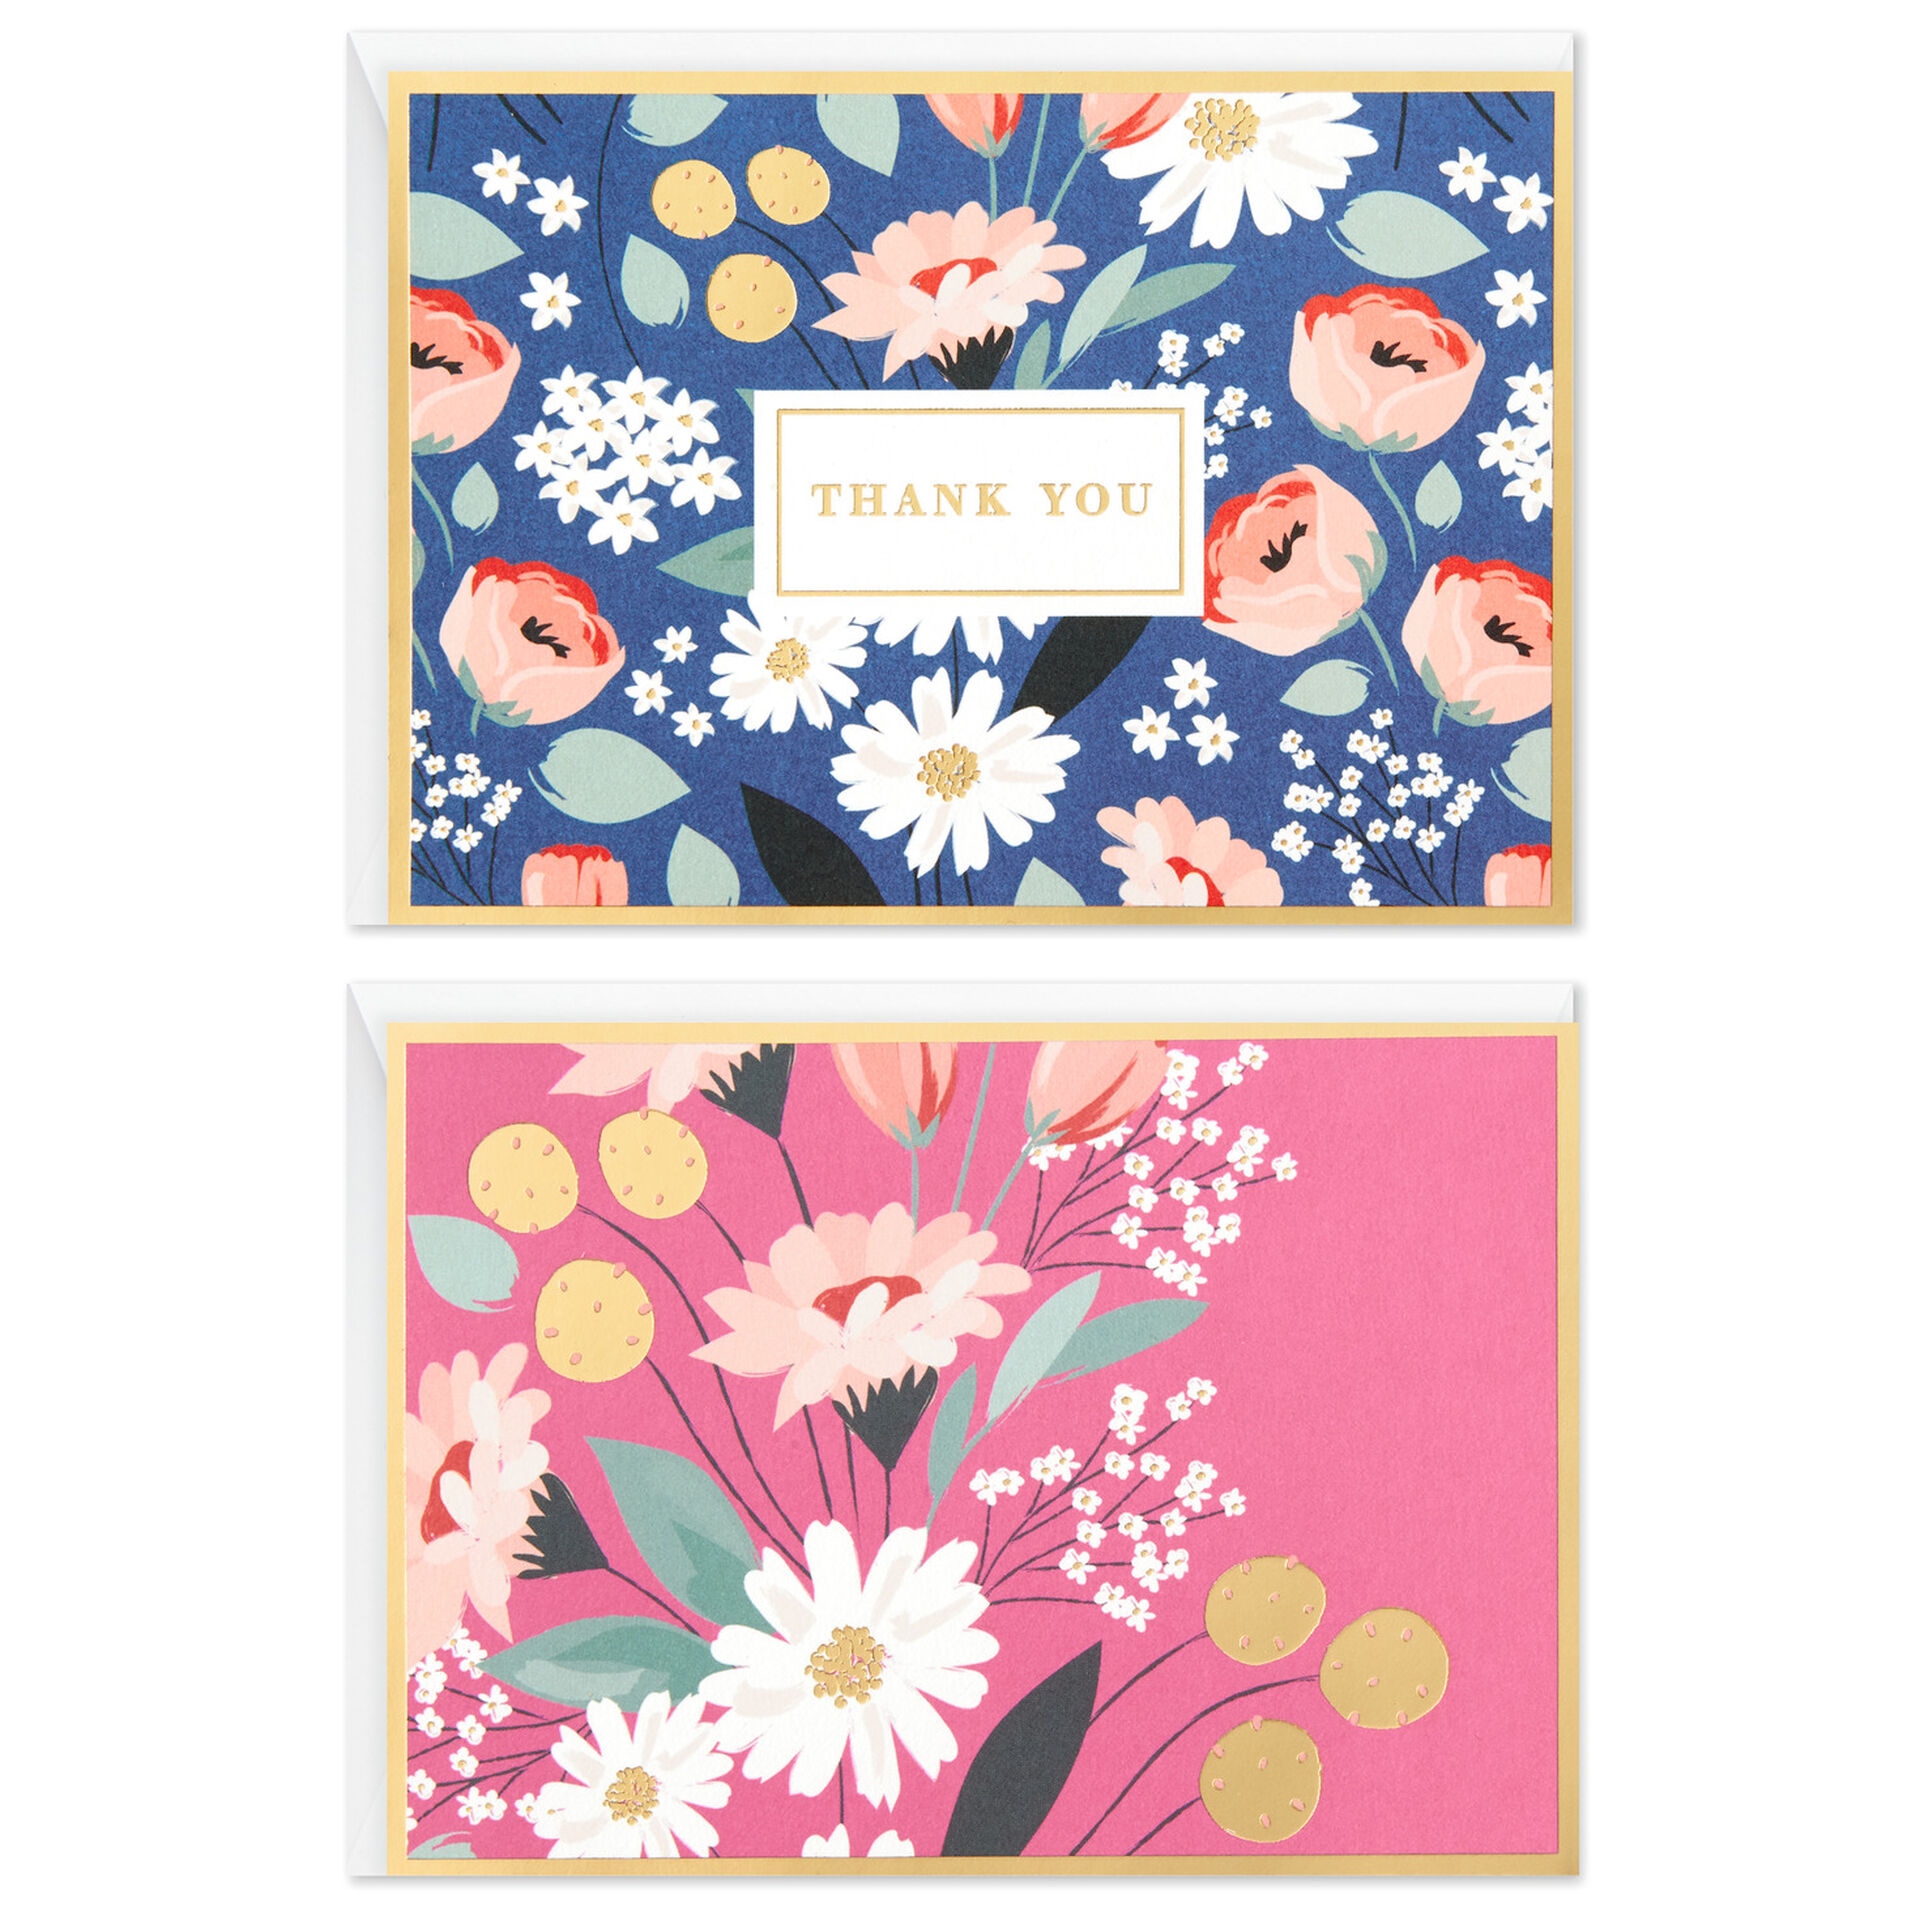 Assorted-Floral-Blank-Note-Cards_1199WTU1020_02